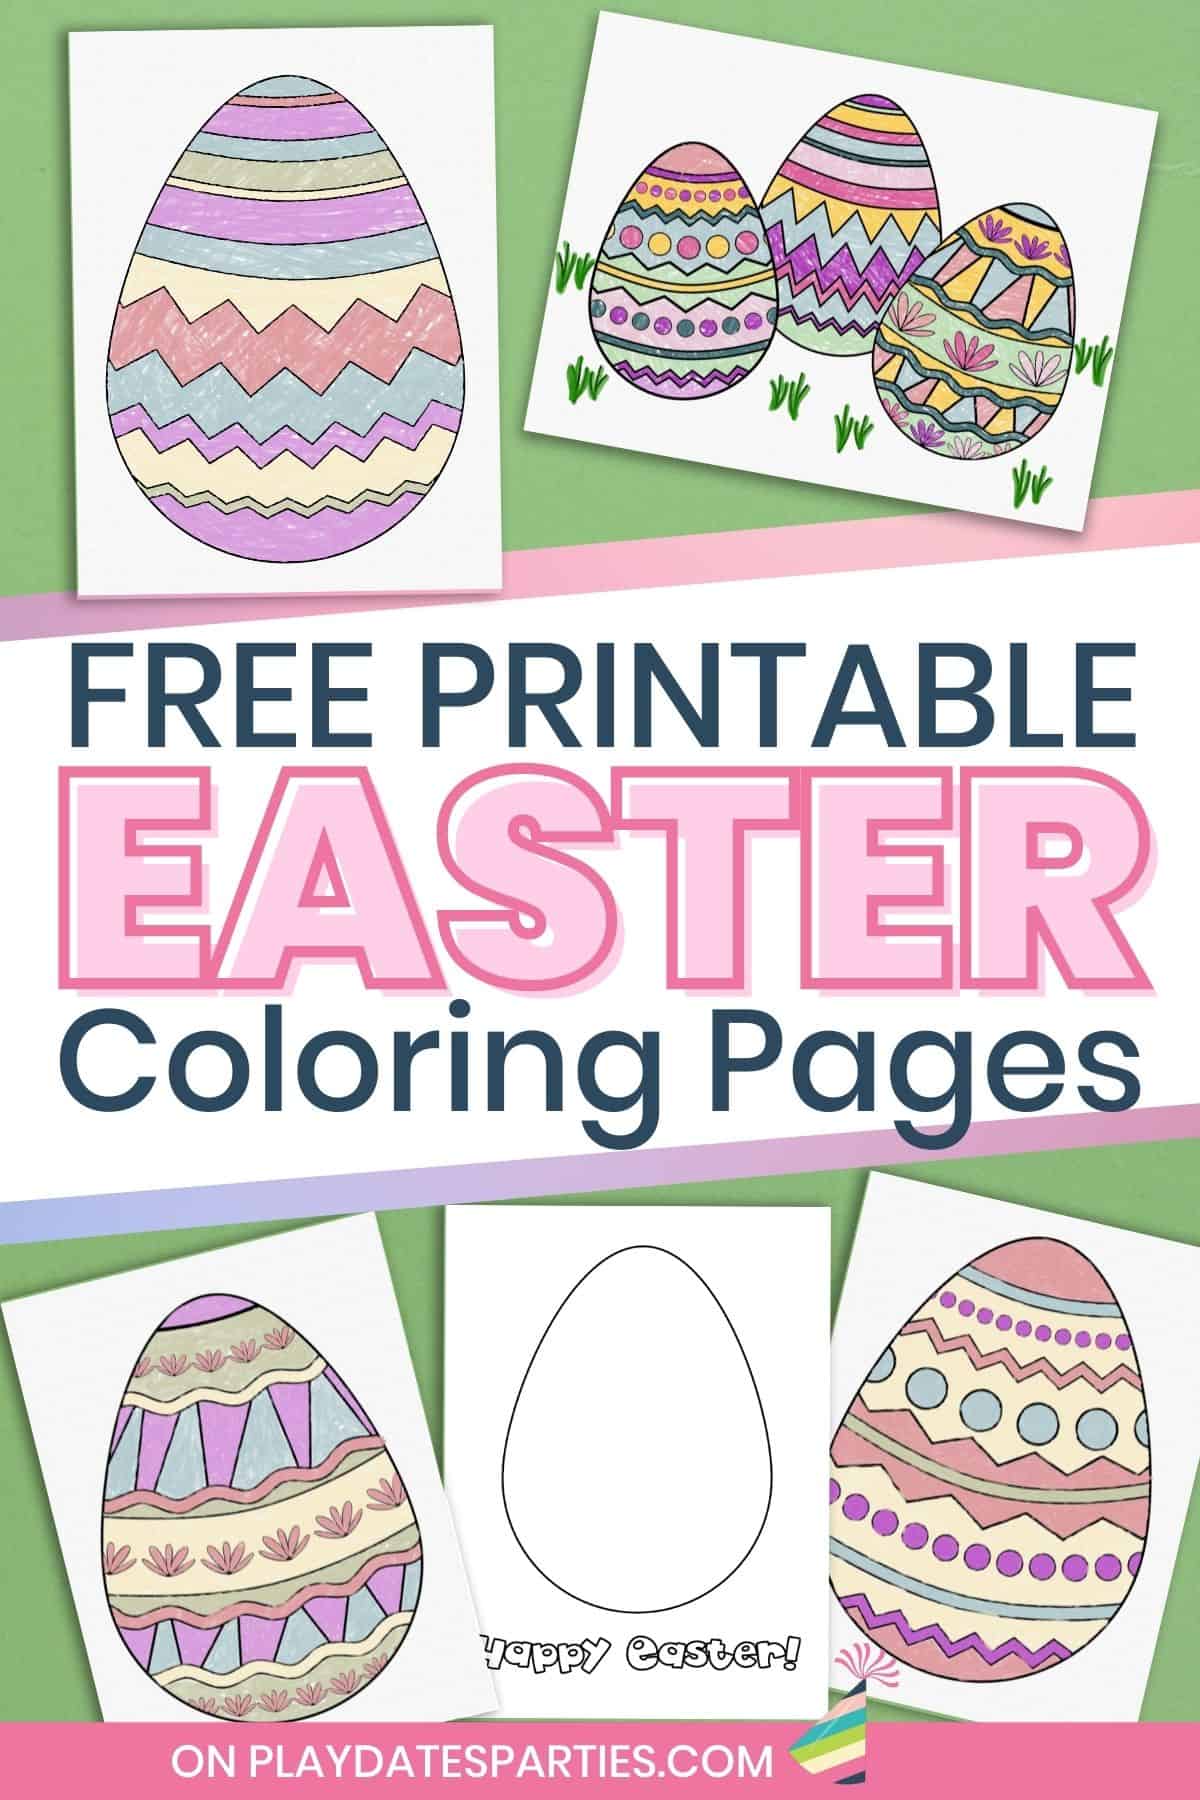 Mockup of four Easter egg coloring pages with text overlay free printable Easter coloring pages.